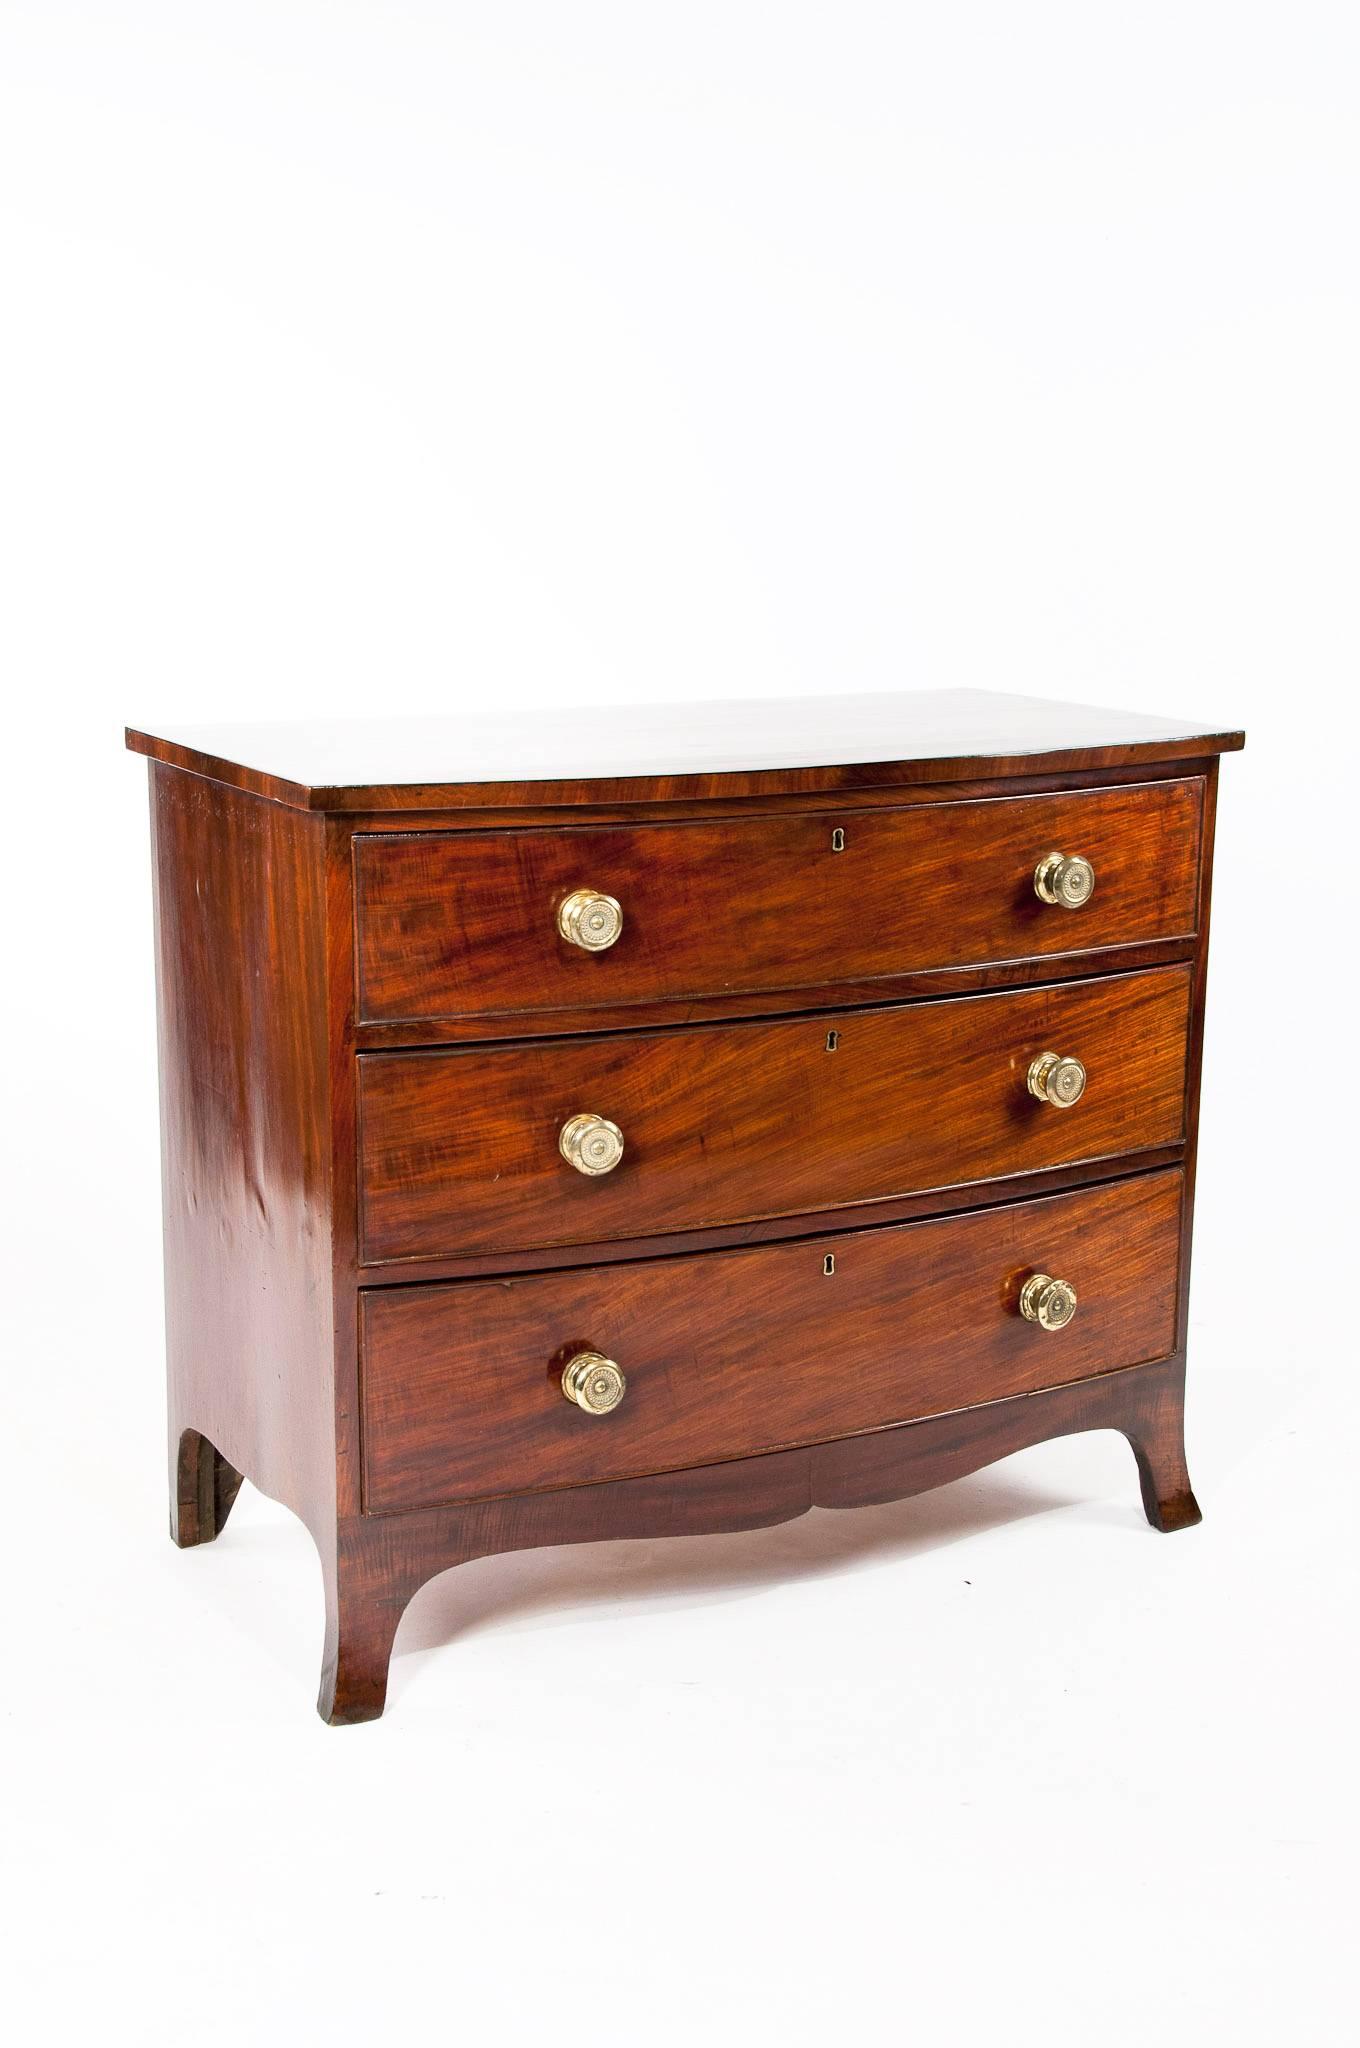 A very good quality George III mahogany bow fronted chest of drawers with ebony stringing and original brass spun knob handles, circa 1800. Having a fine bow fronted rectangular 